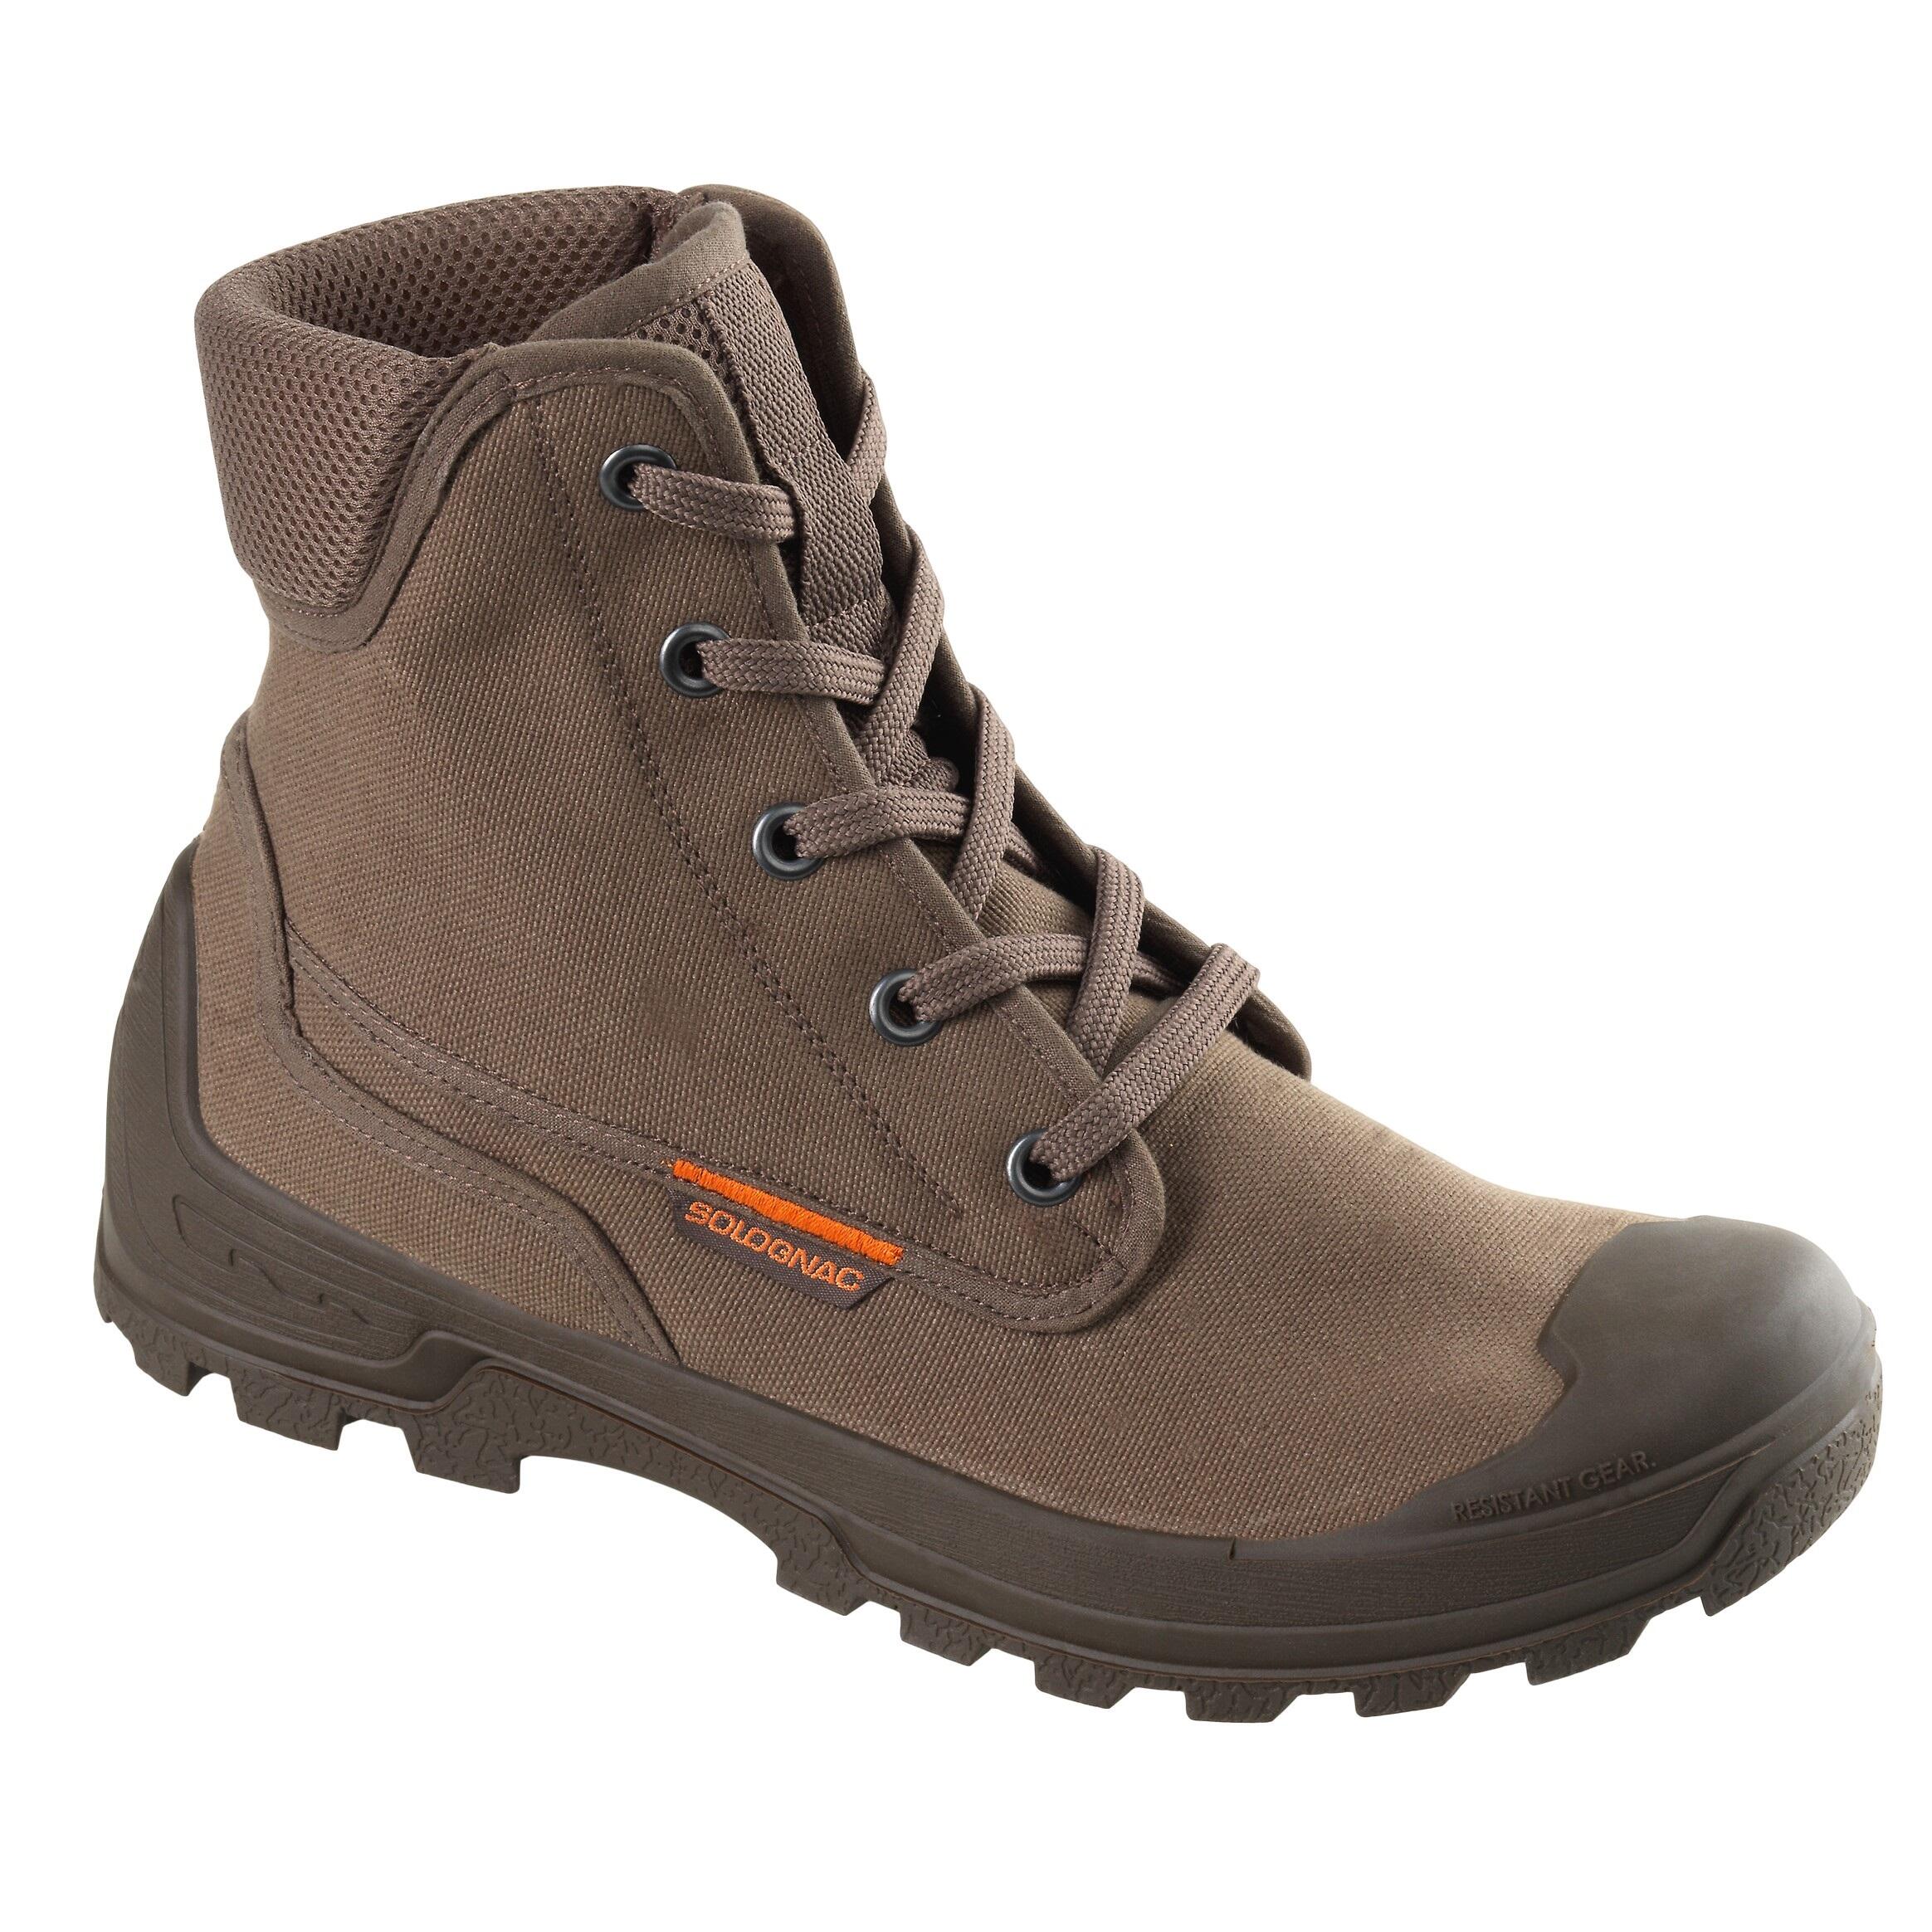 Hunting Boots Buy Online at Decathlon India